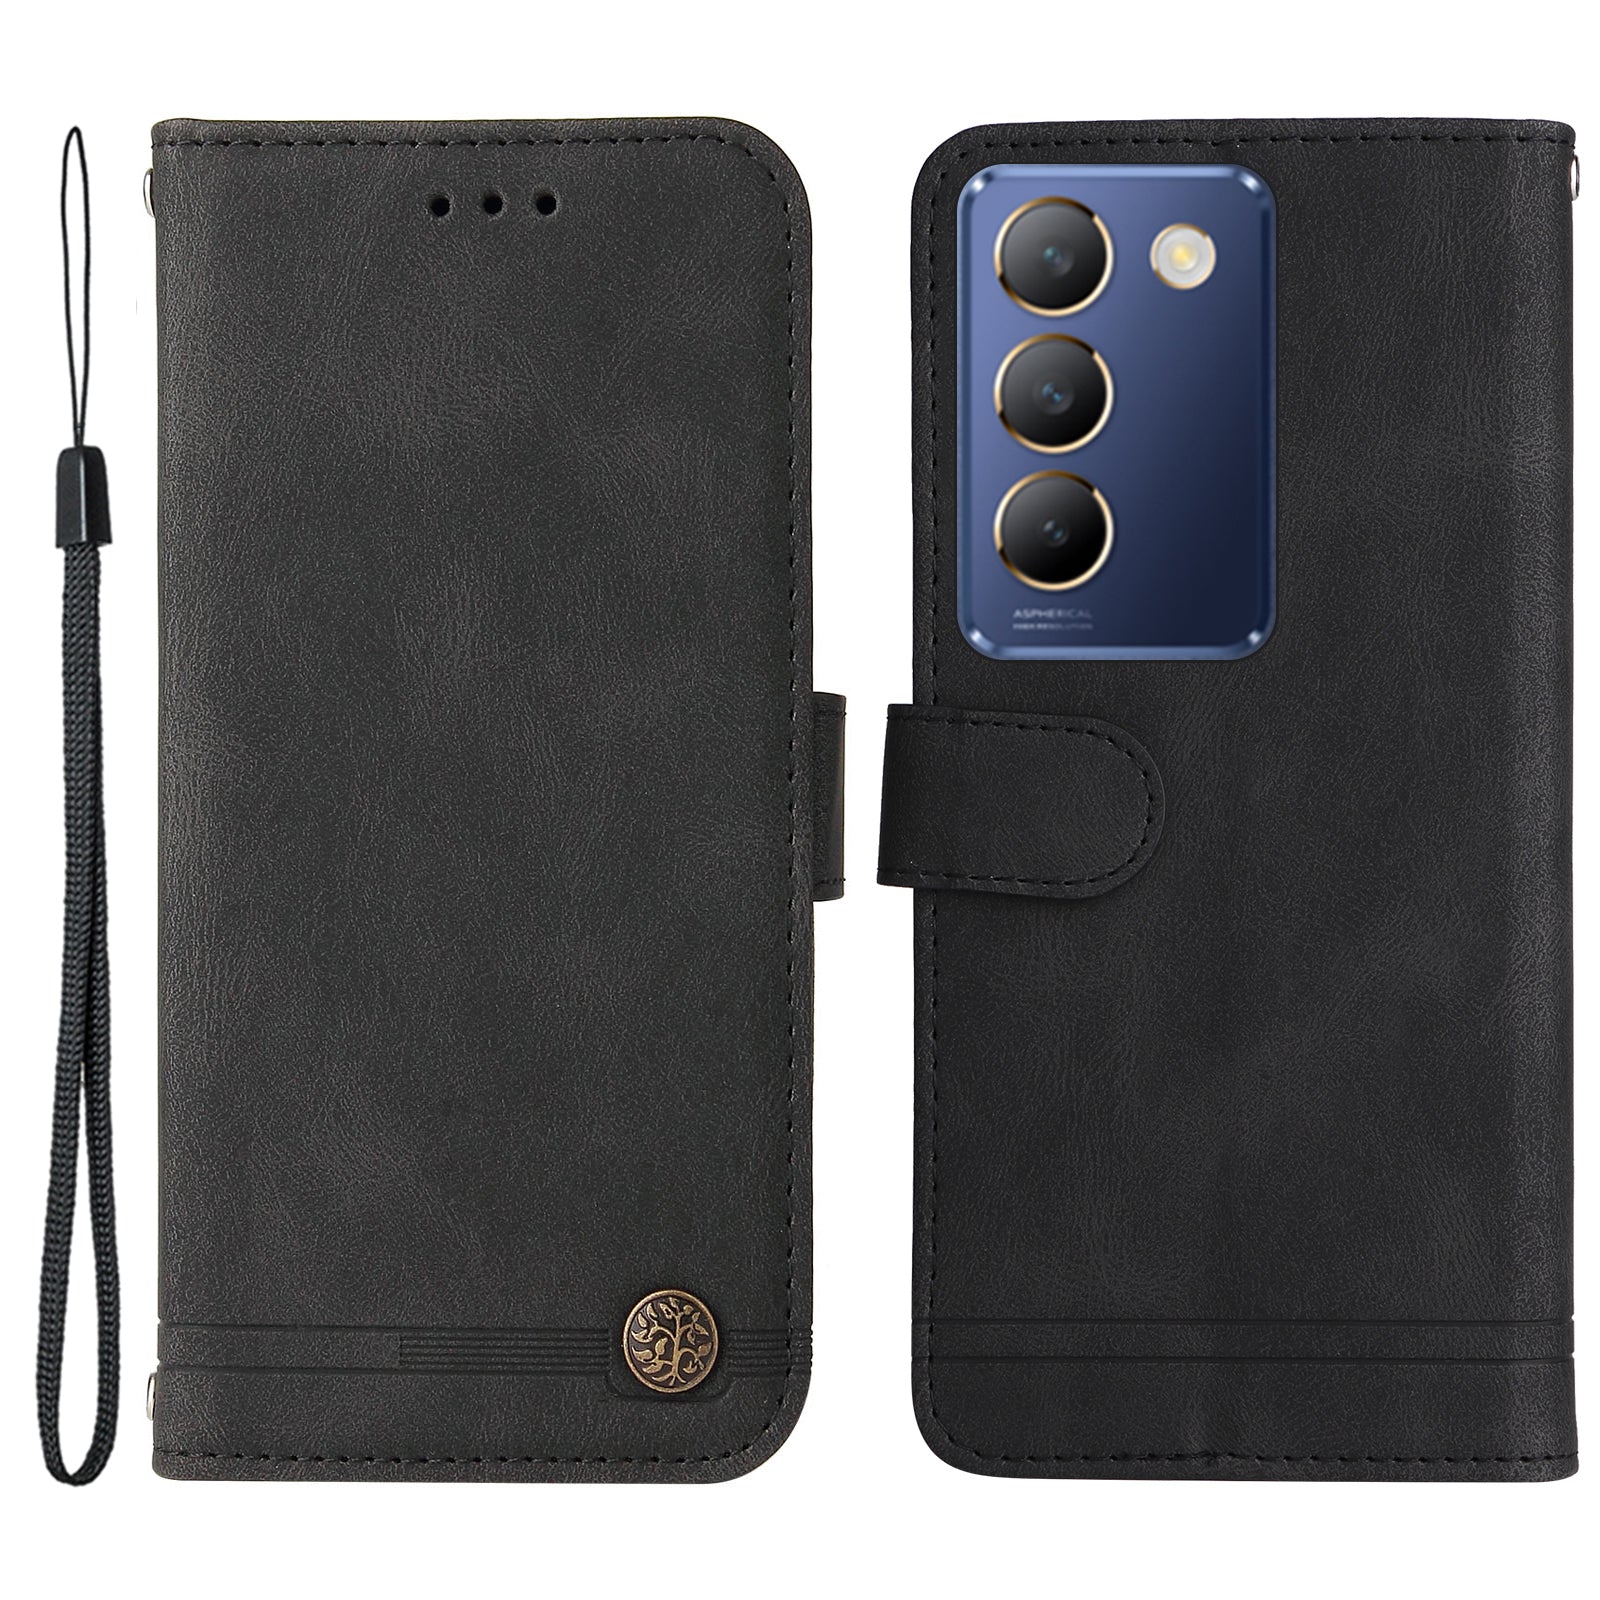 For vivo Y200e 5G / Y100 5G (Indonesia) / T3 5G (India) / V30 Lite 5G (India) Skin-touch Case Imprinted with Lines - Black